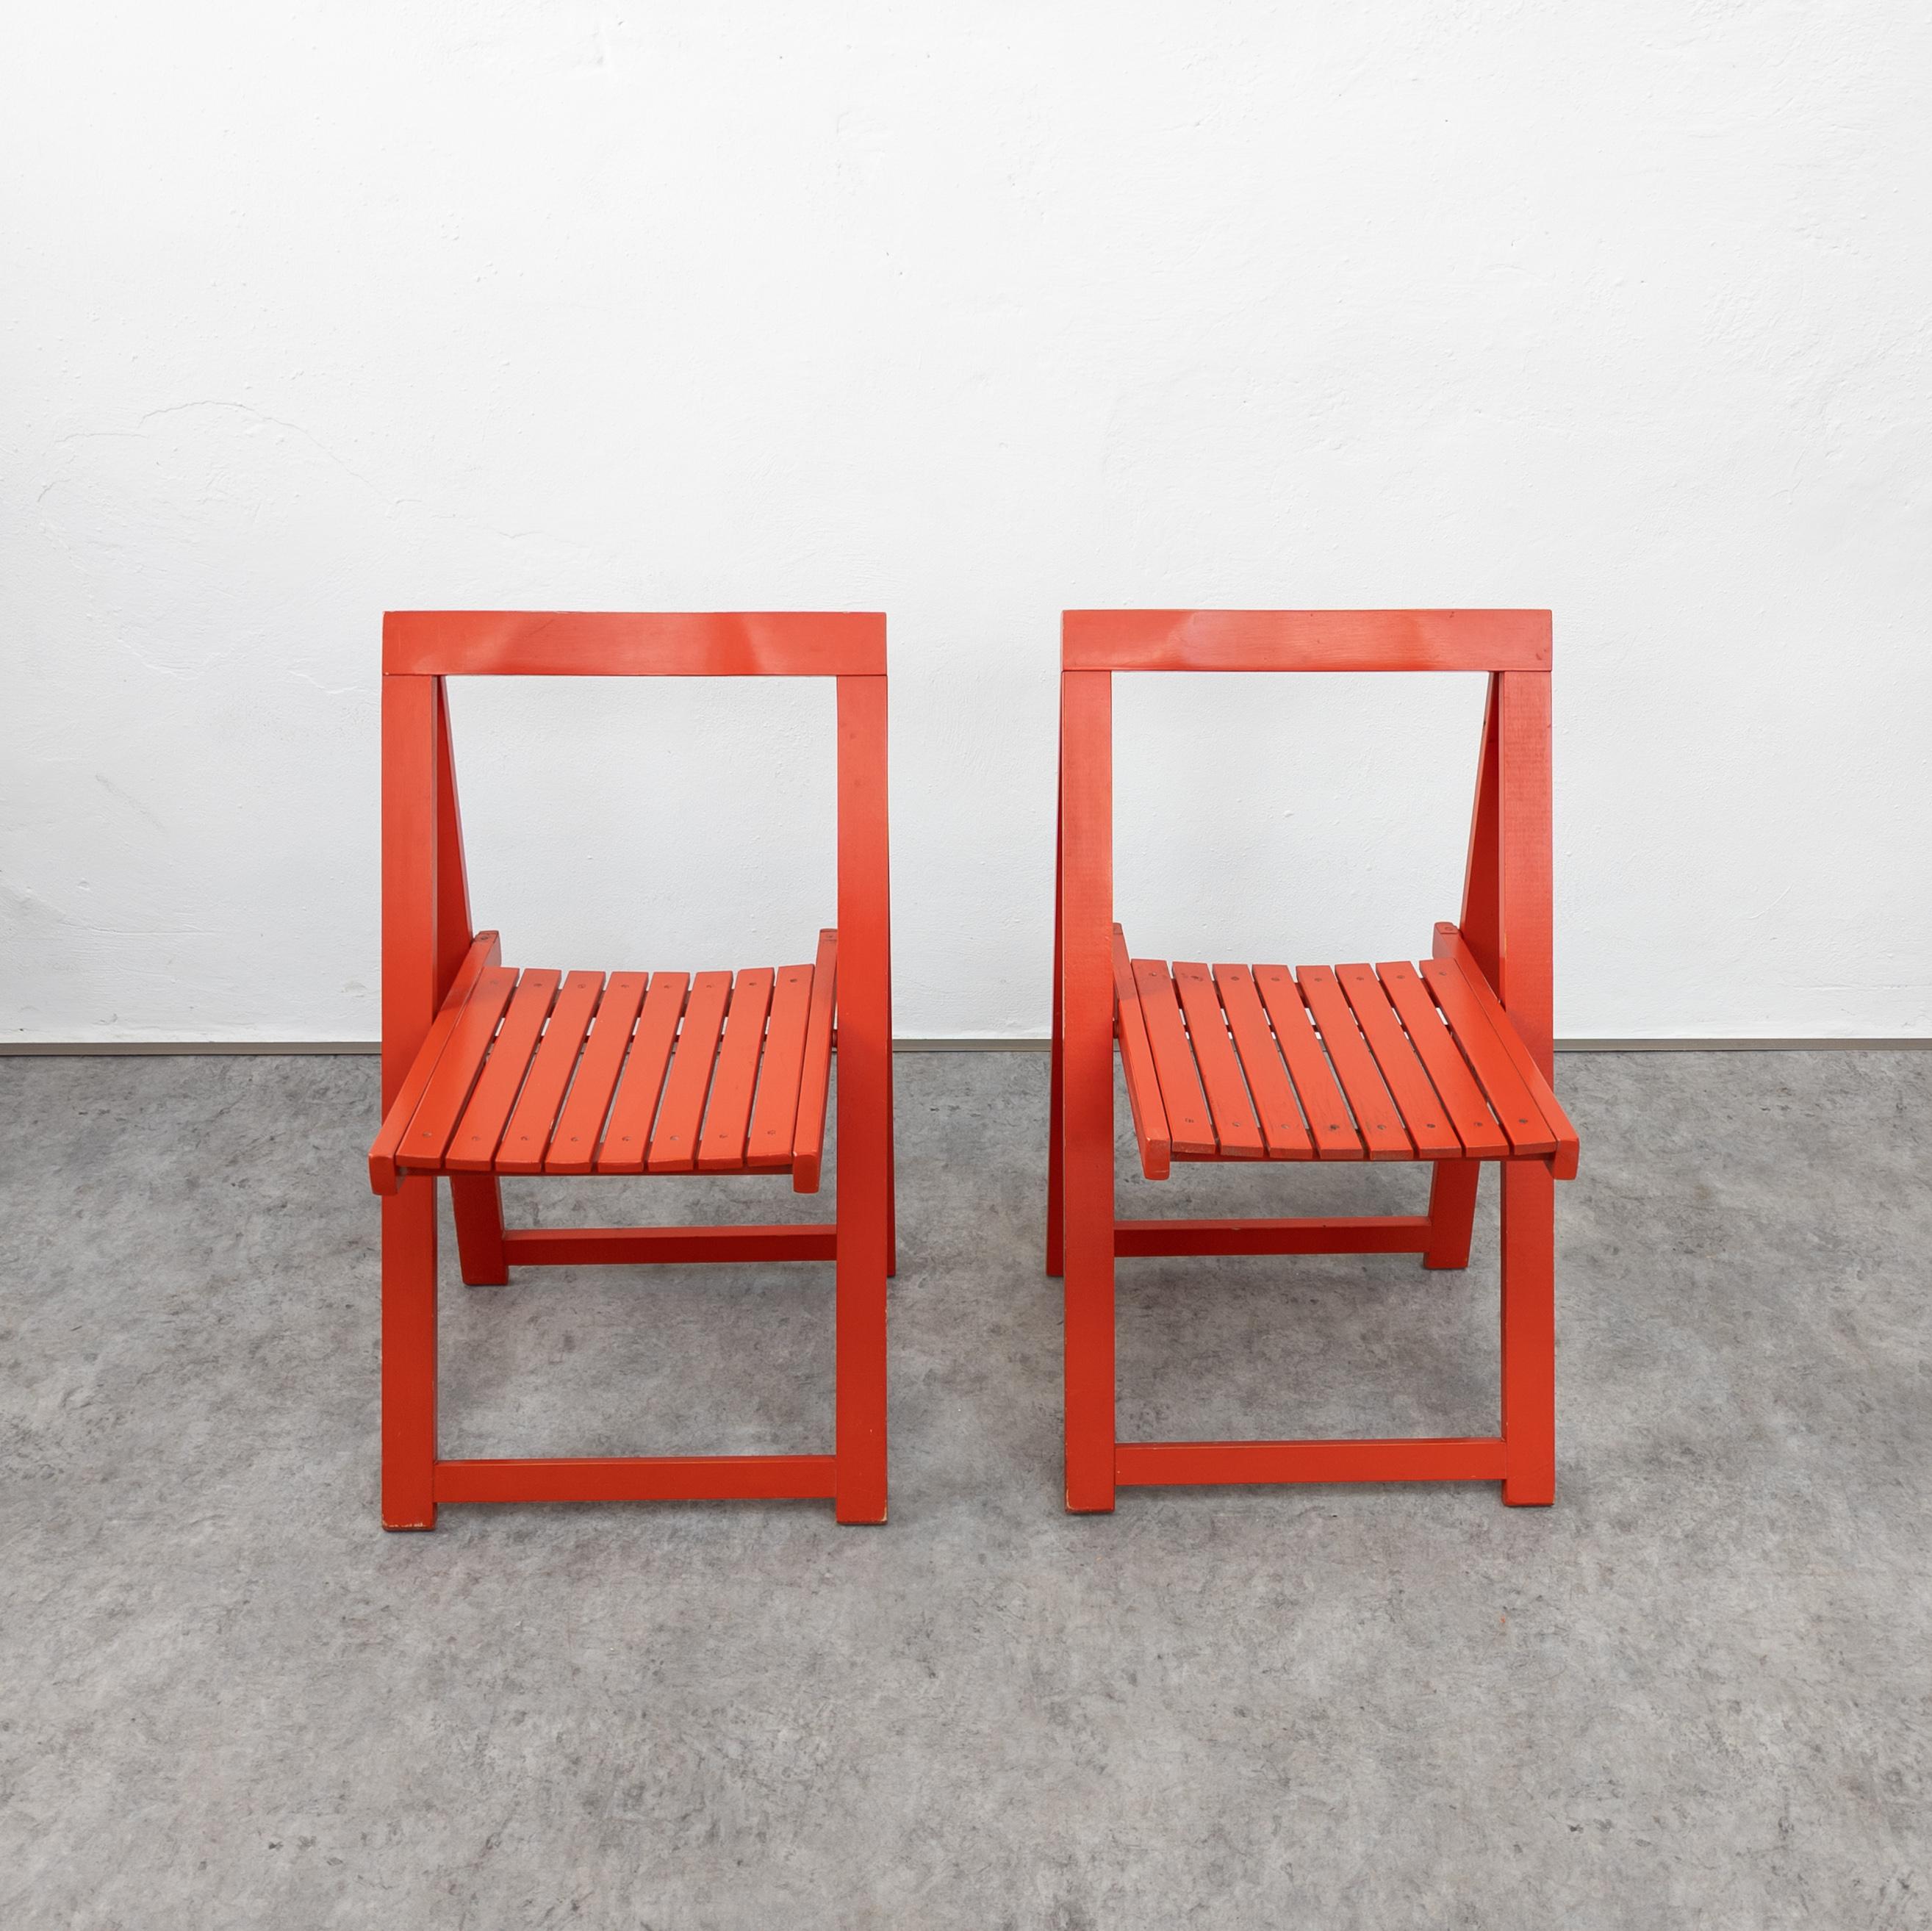 Mid-20th Century Pair of Vintage Folding Chairs by Aldo Jacober for Alberto Bazzani For Sale